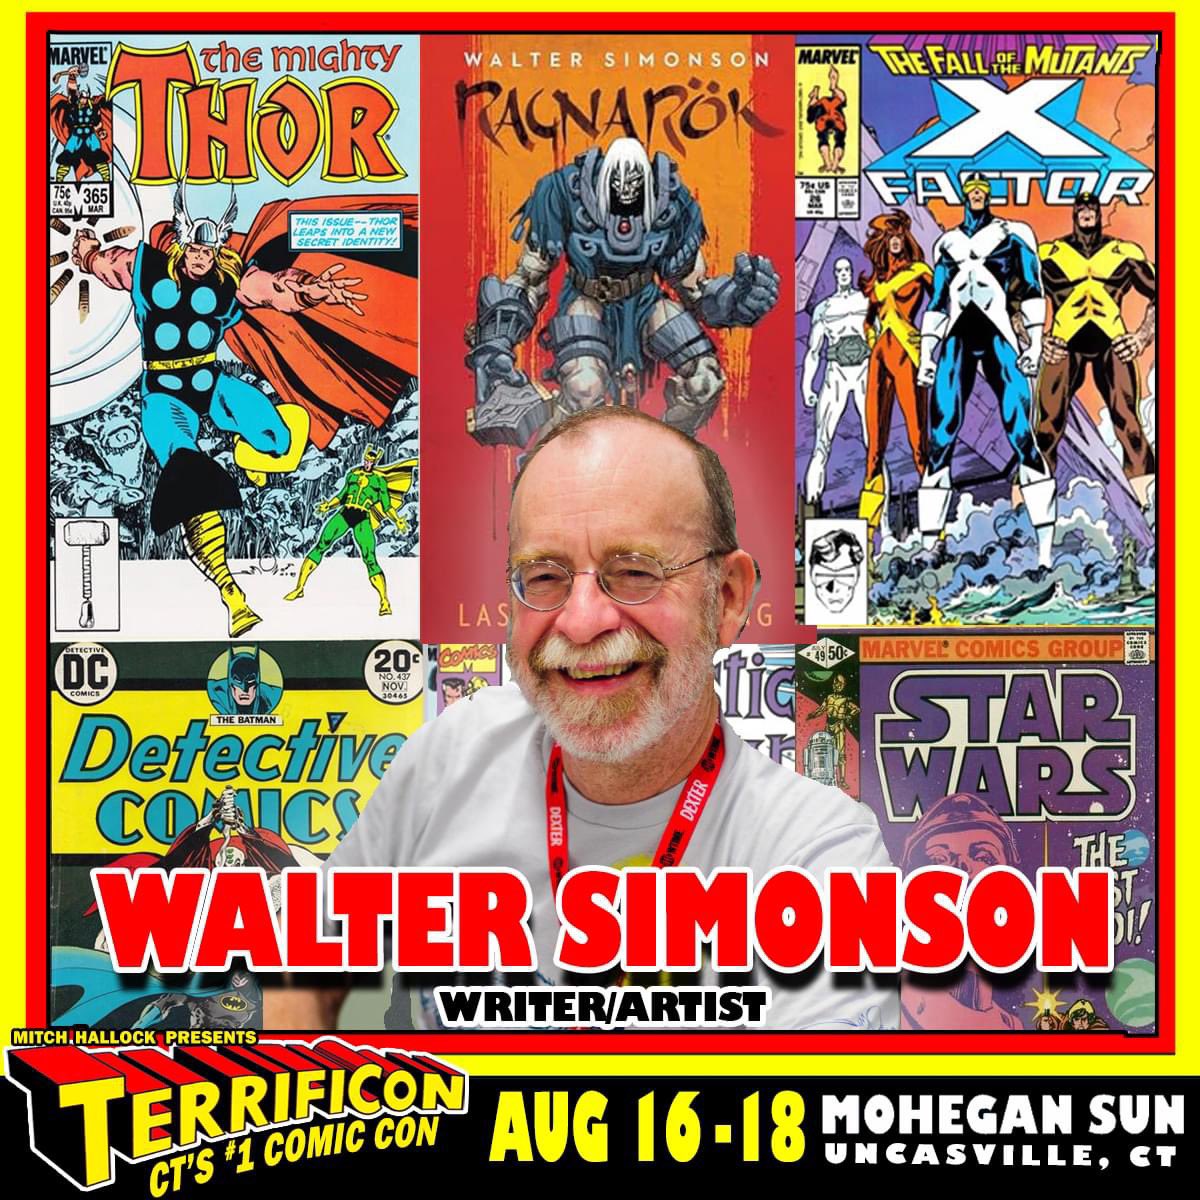 TERRIFICON is kicking off 'welcome back week' by spotlighting returning guests with artist/writer Walter Simonson! Join us on August 16-18 at Mohegan Sun in Uncasville, CT for the largest gathering of comic book creators in New England. Mr. Simonson is best known for a run on…